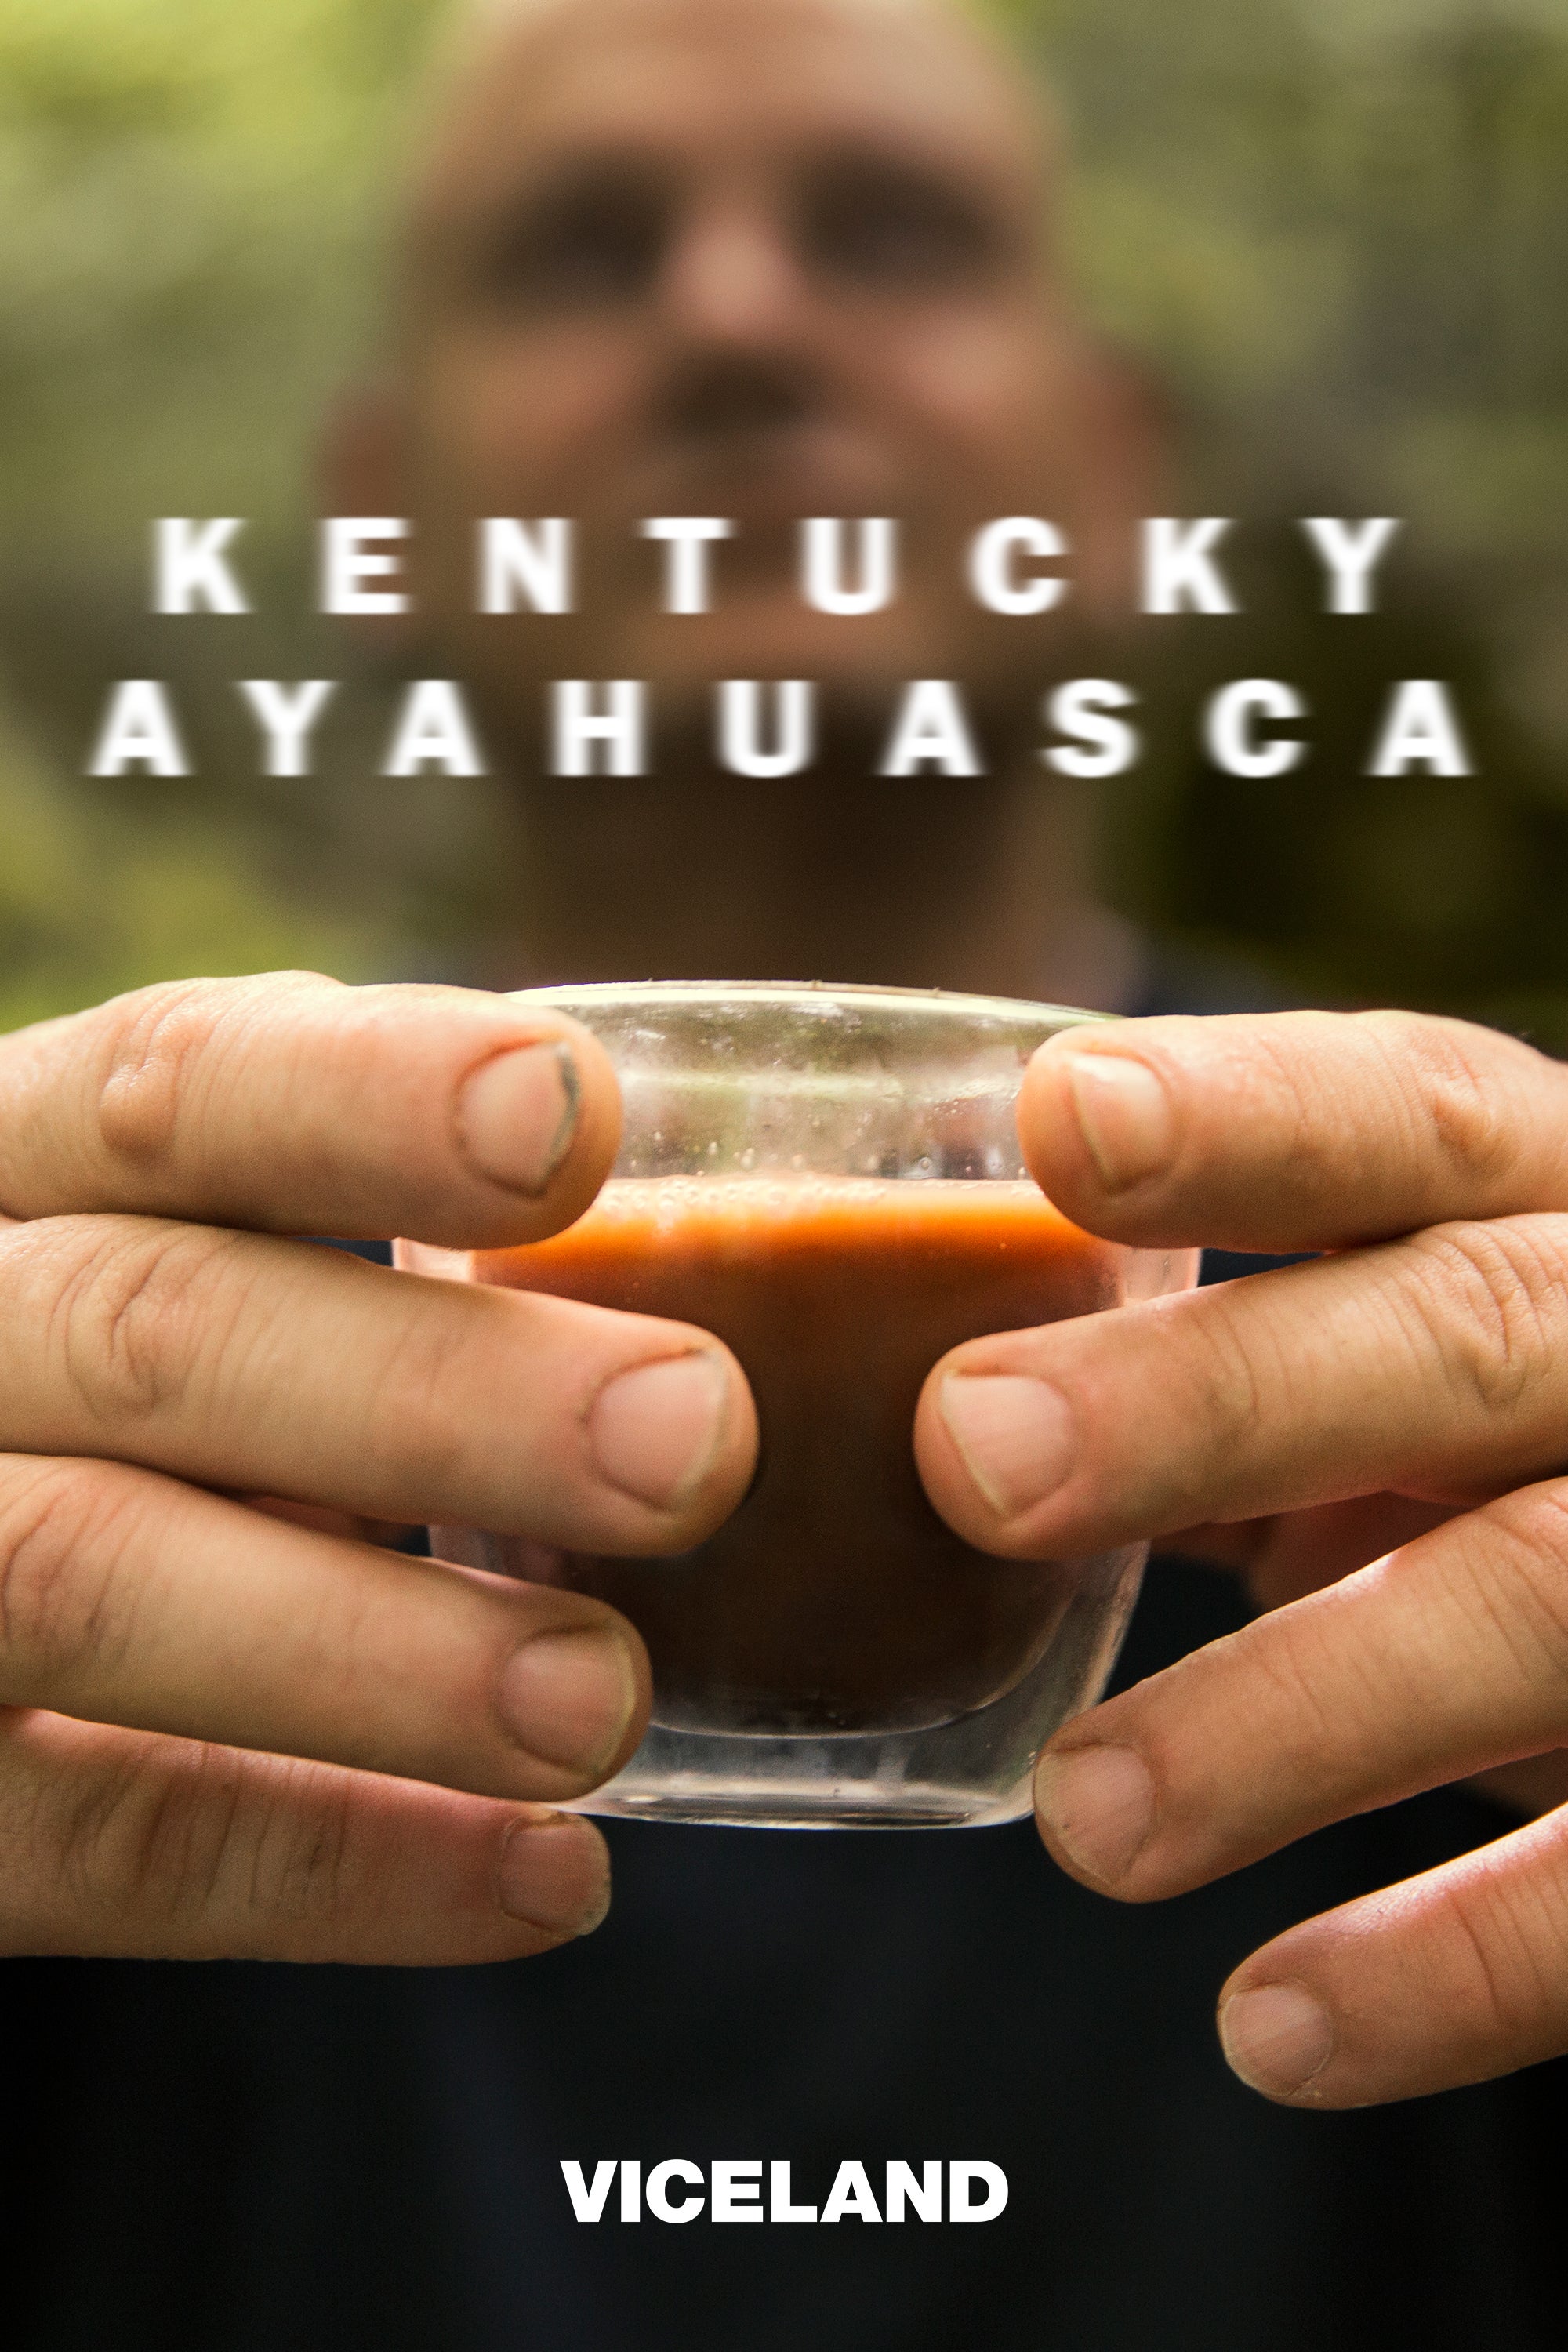 TV ratings for Kentucky Ayahuasca in Portugal. Viceland TV series